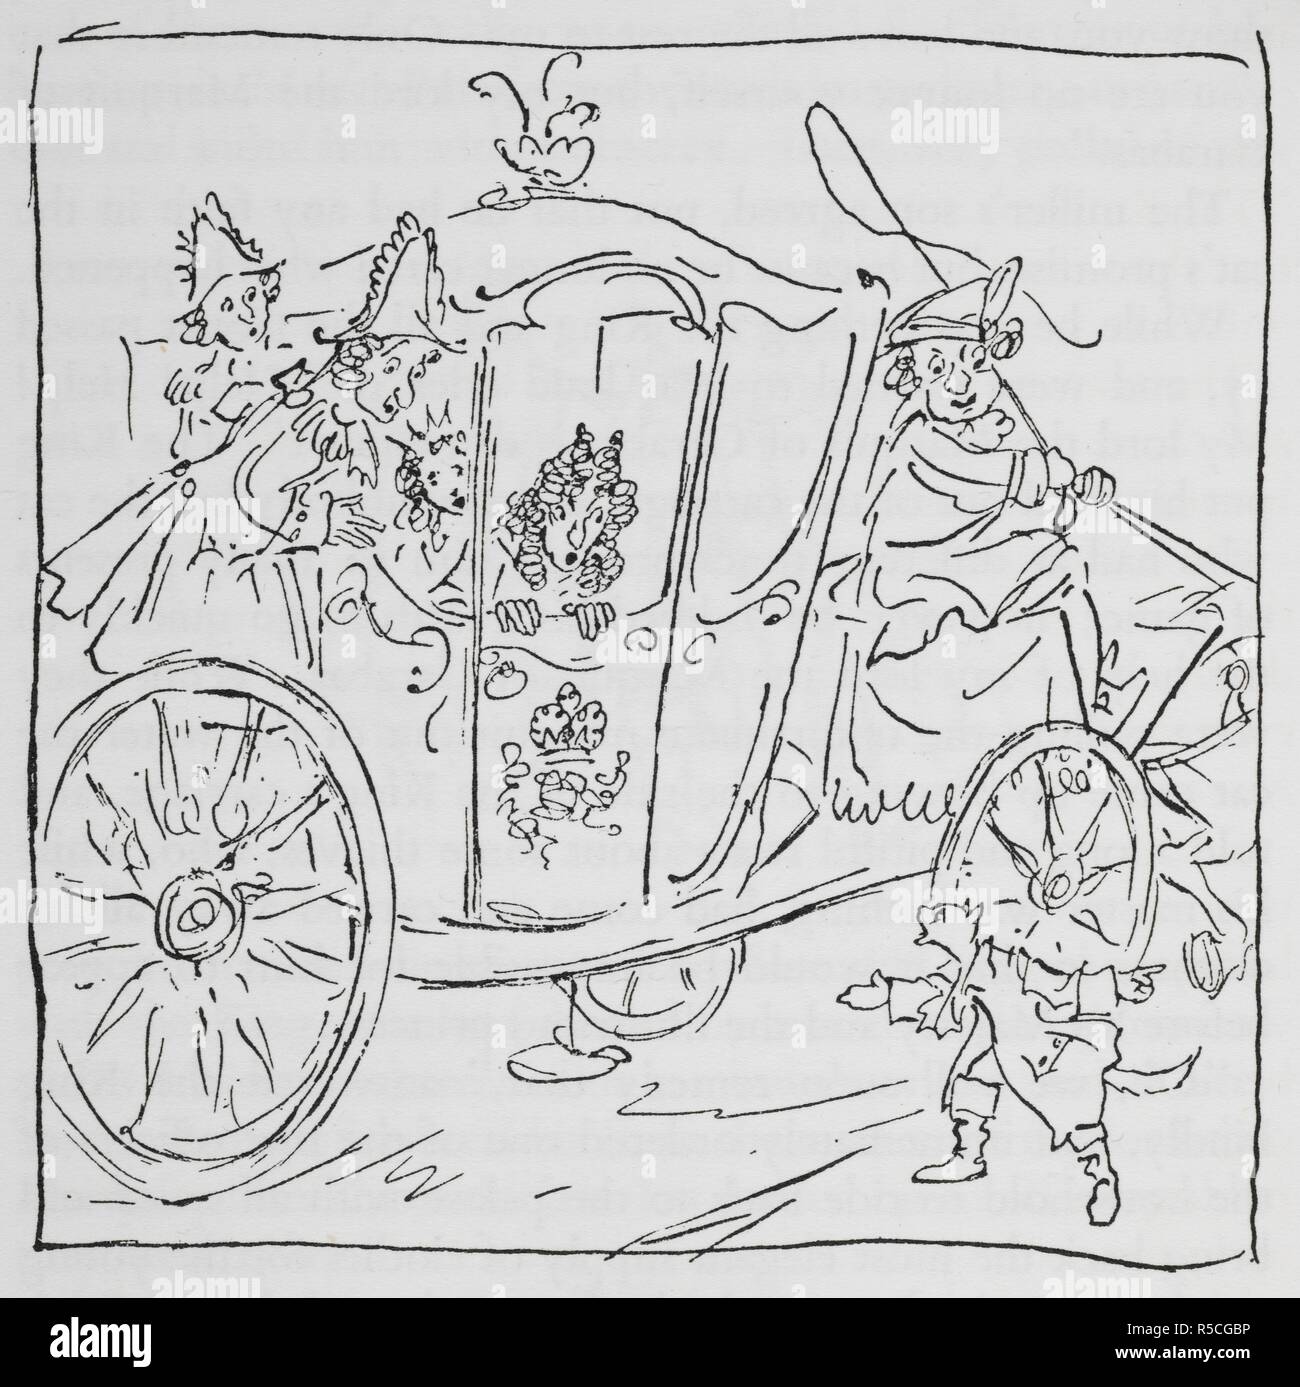 Puss in Boots and the King in his carriage. The Arthur Rackham Fairy Book, etc. London : G. G. Harrap & Co., 1933. Source: 12403.bb.17 p. 236. Stock Photo